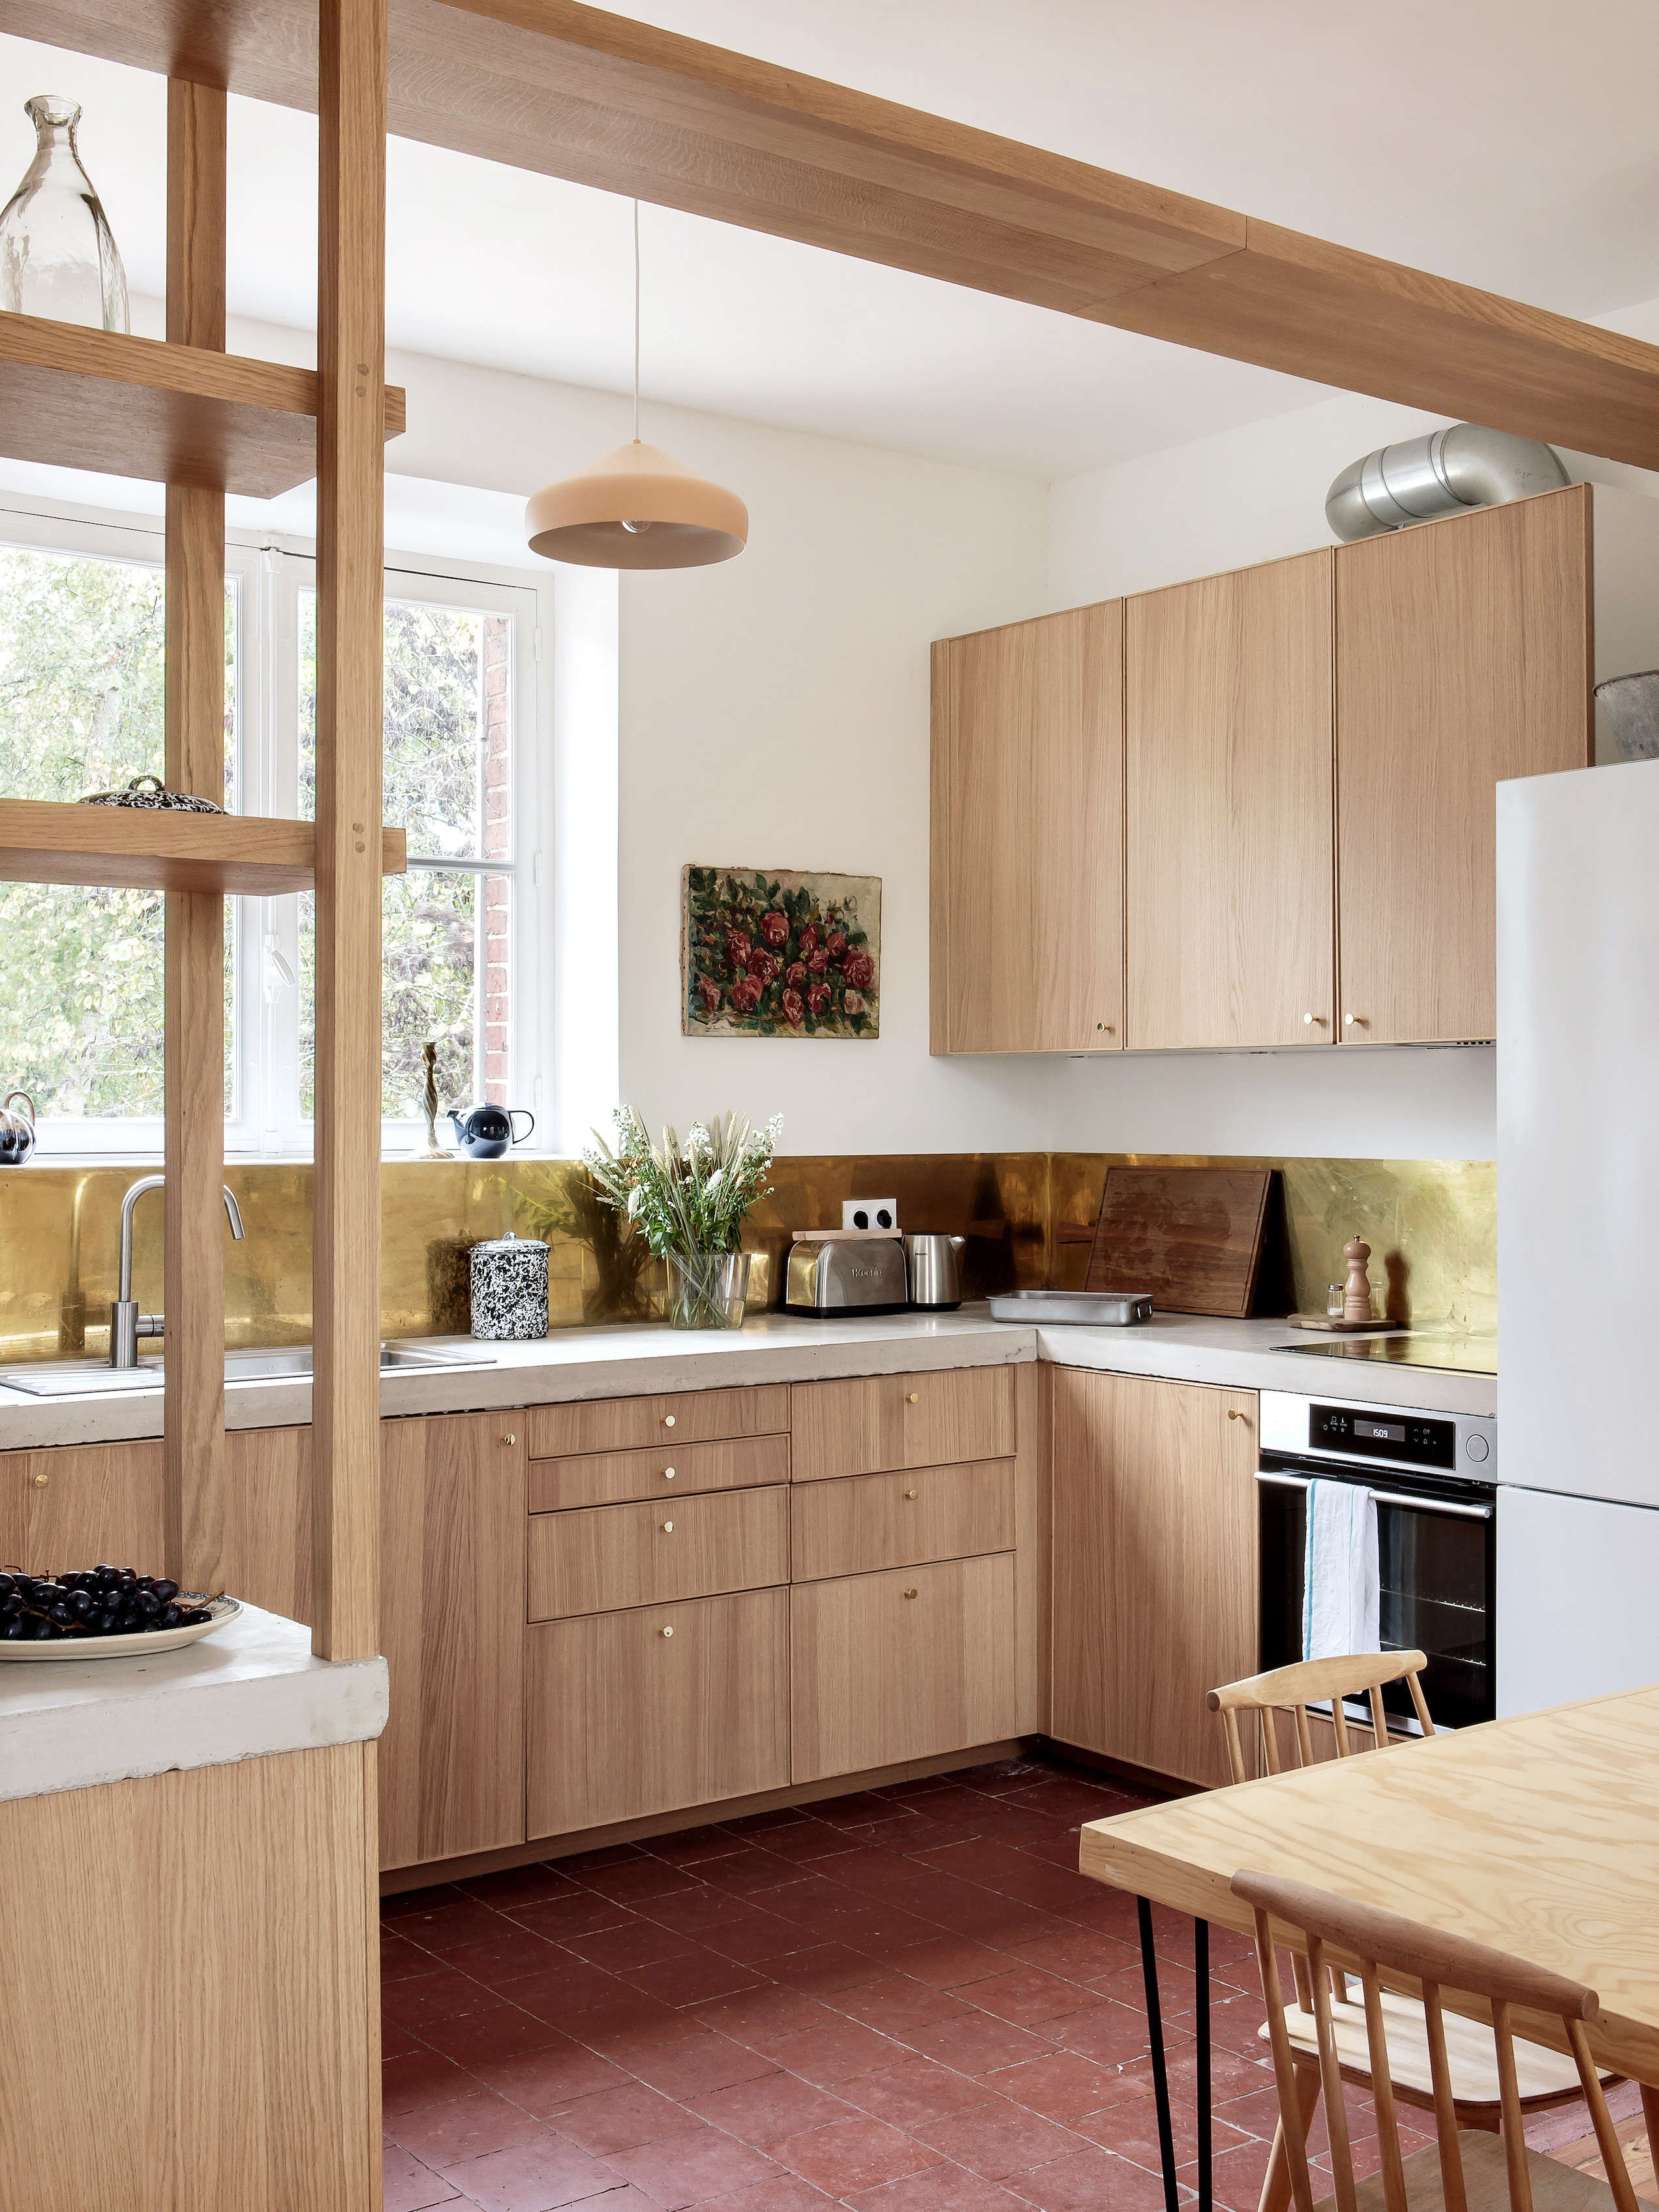 In Praise of Ikea 20 Ikea Kitchens from the Remodelista Archives ...